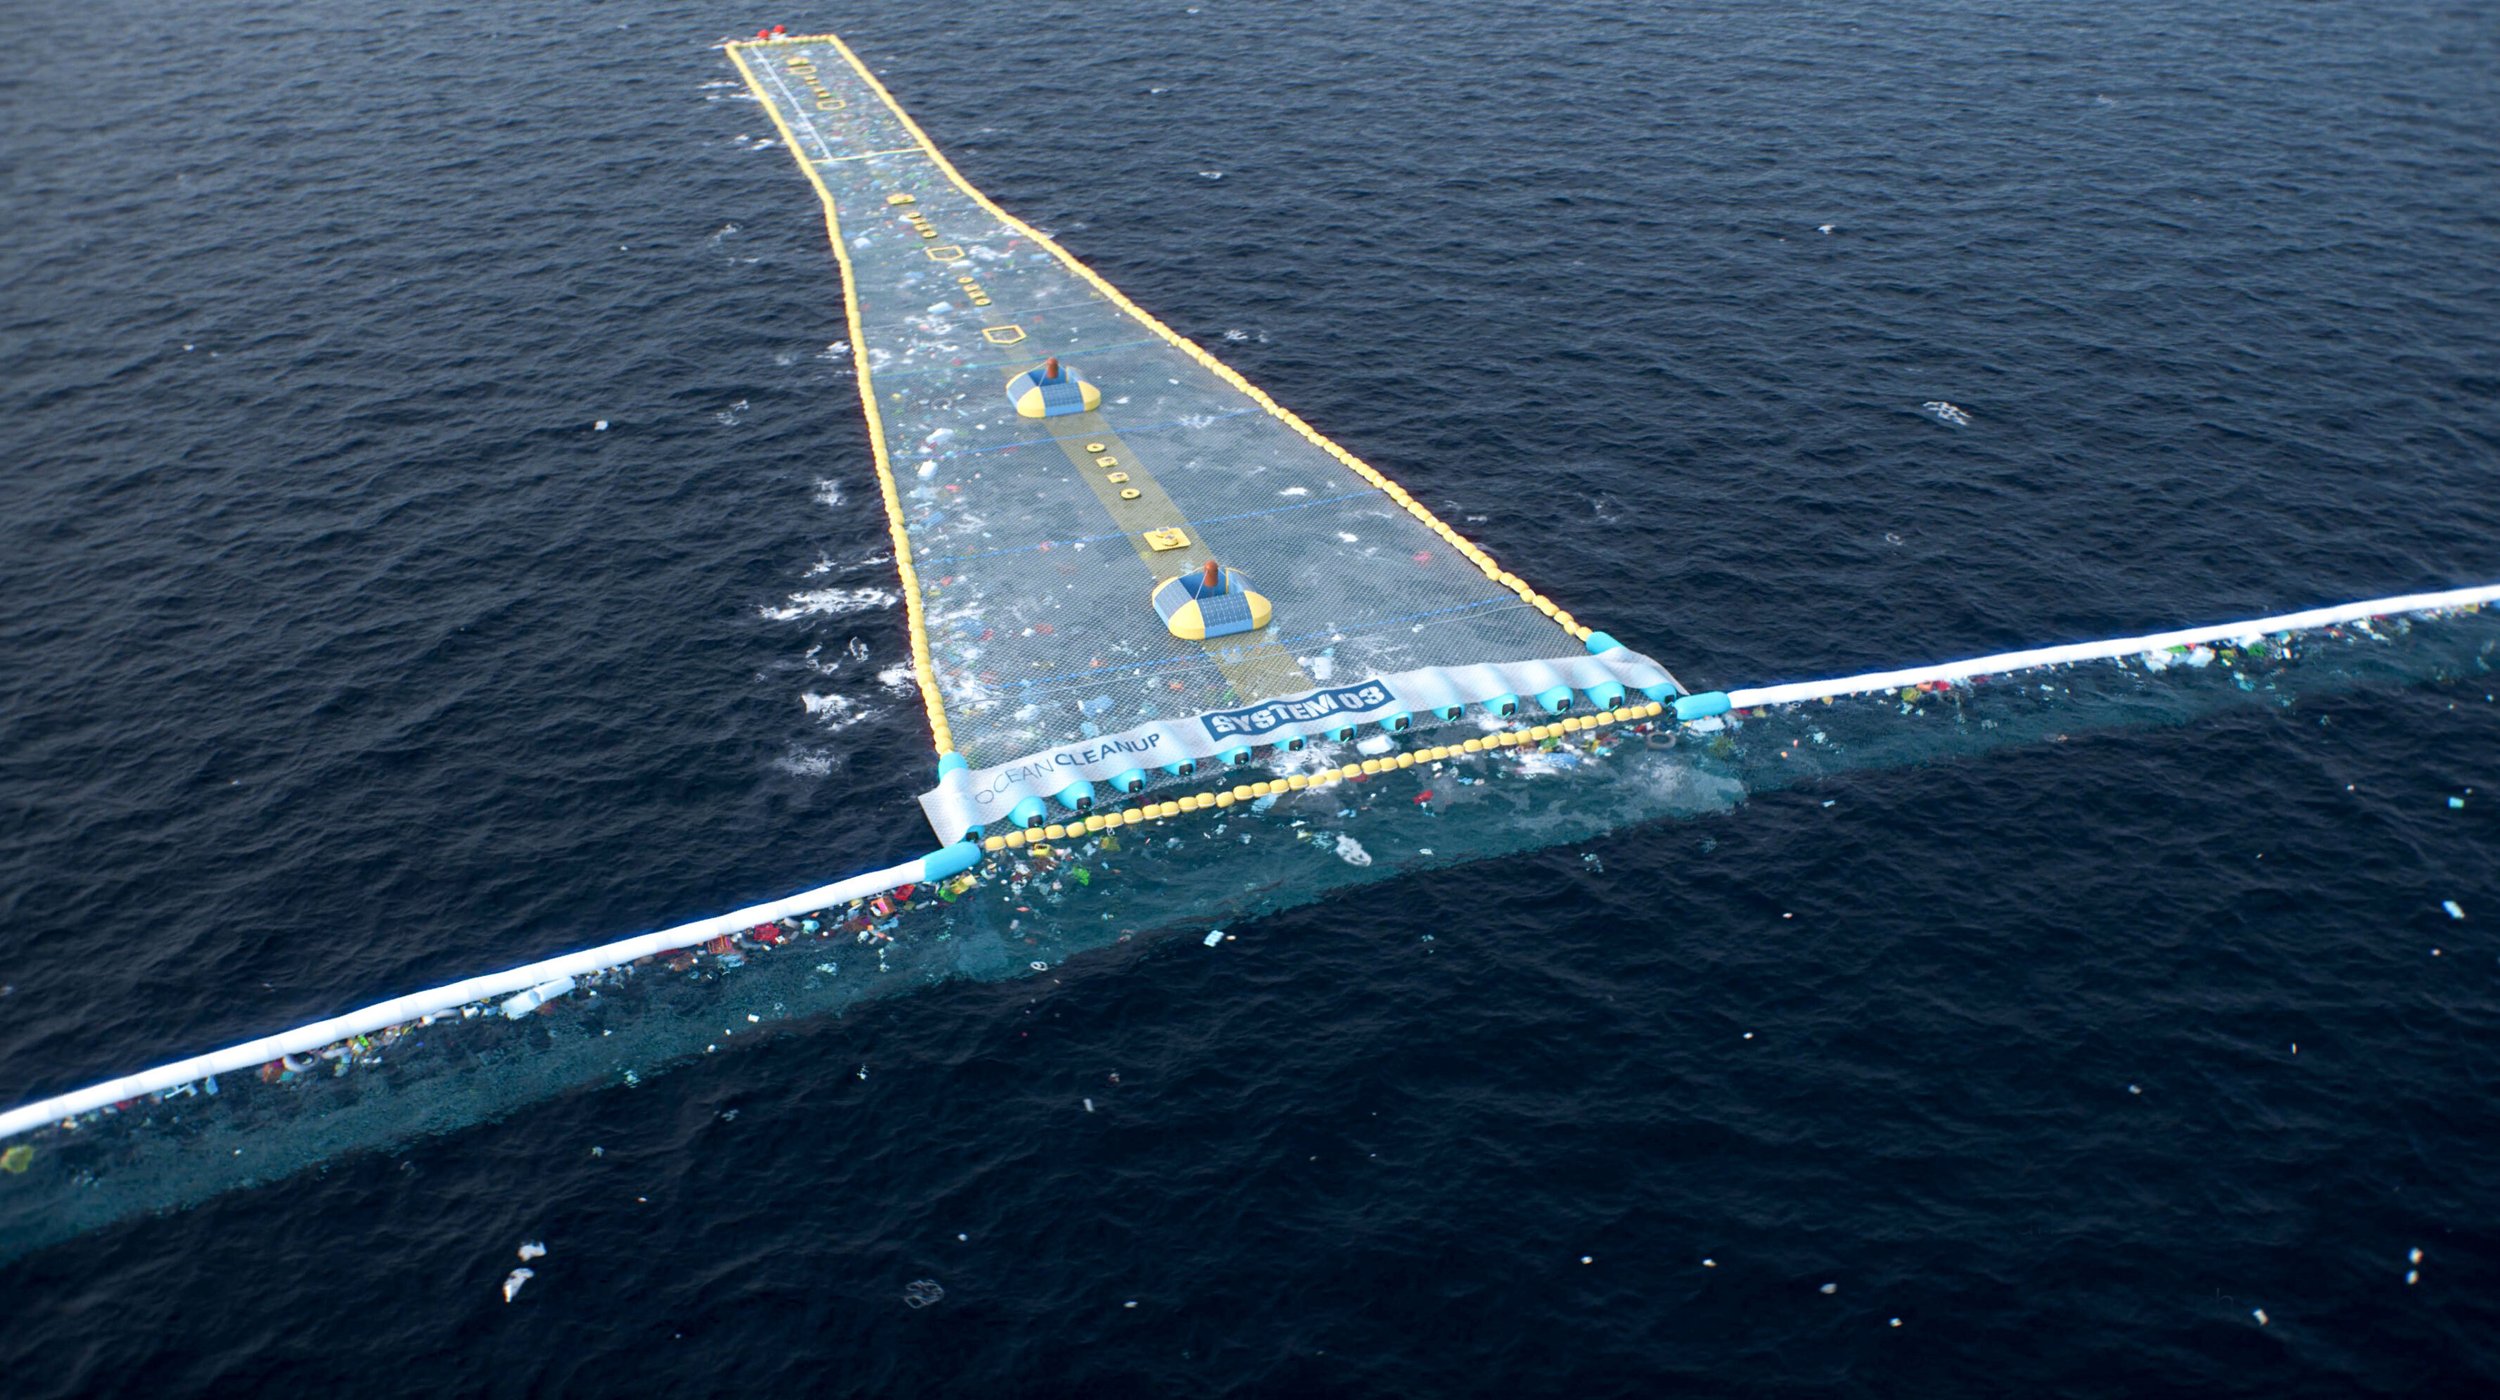 Image Credit: The Ocean Cleanup